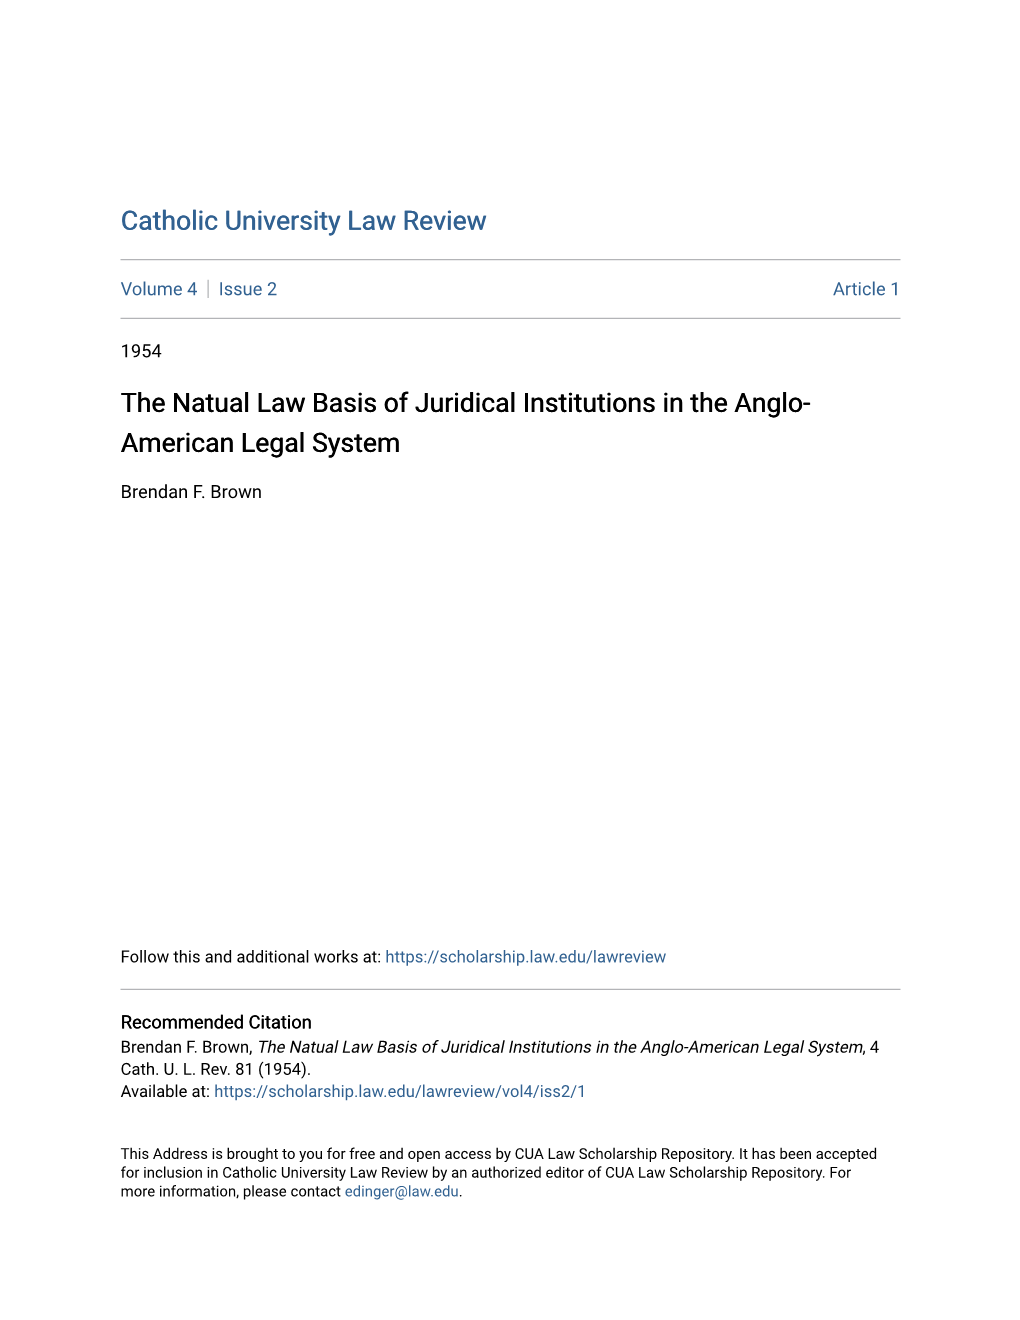 The Natual Law Basis of Juridical Institutions in the Anglo-American Legal System, 4 Cath